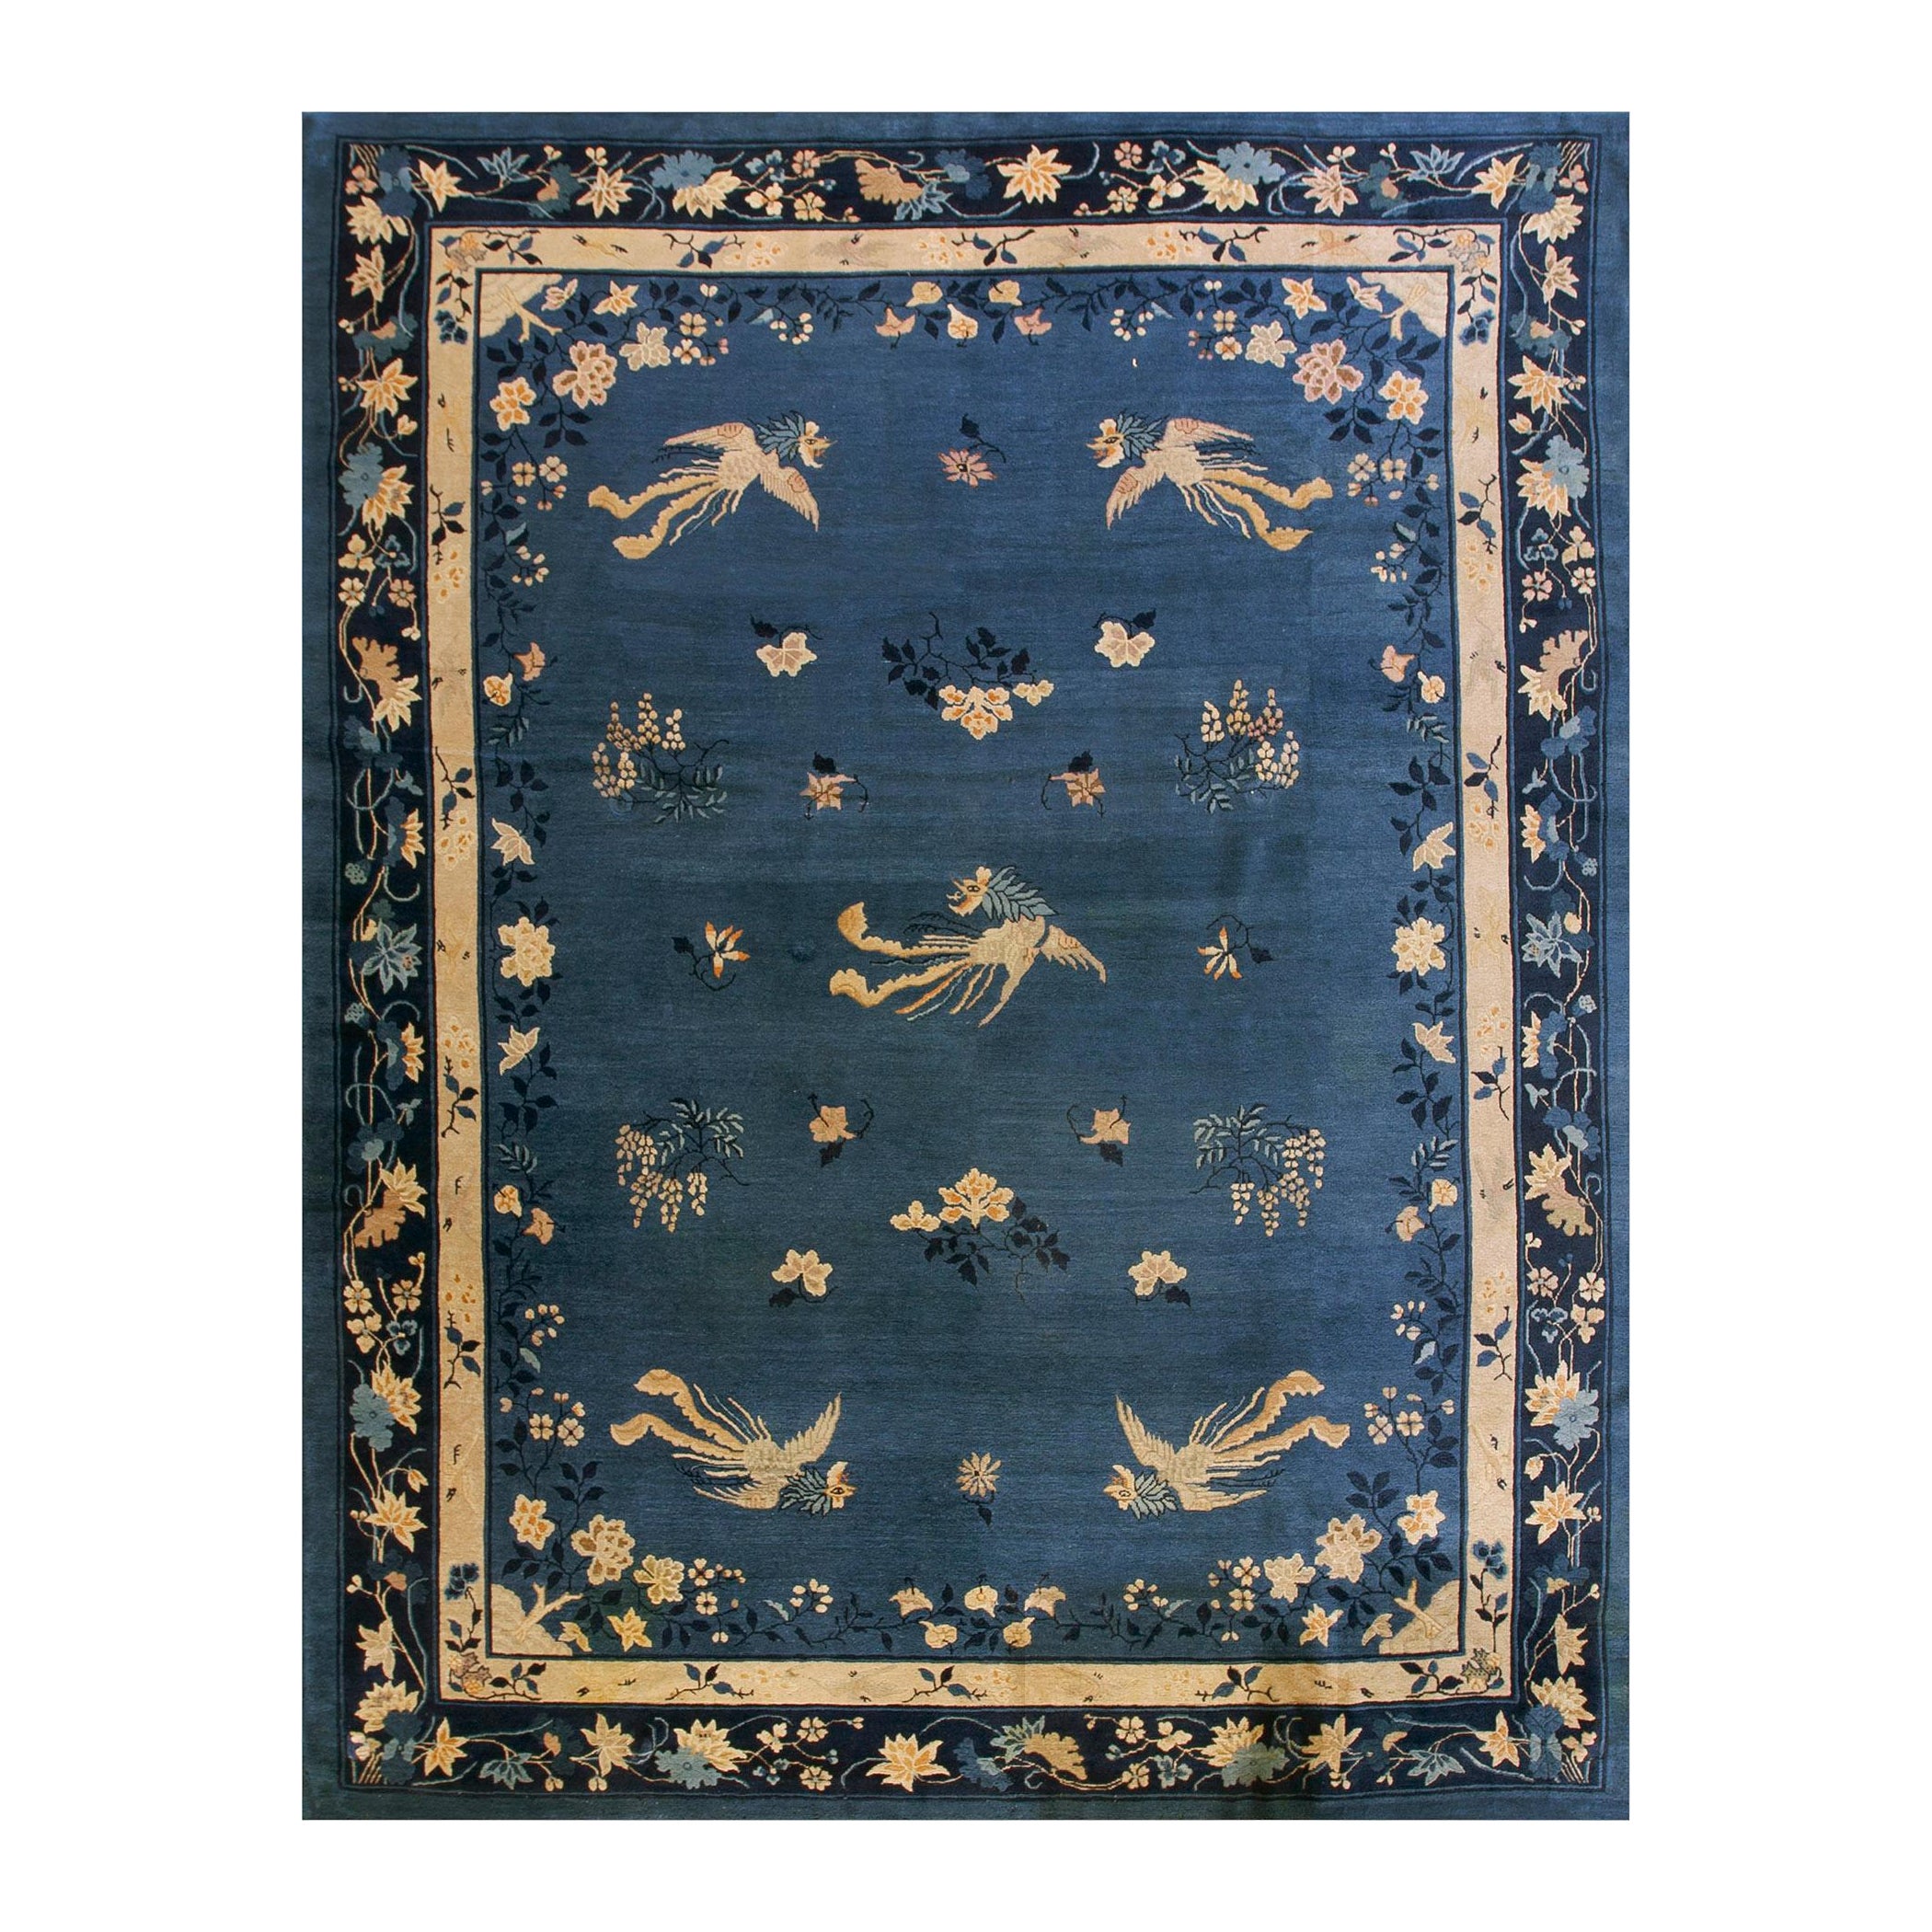 Early 20th Century Chinese Peking Carpet ( 9'2" x 11'6" - 280 x 355 ) For Sale